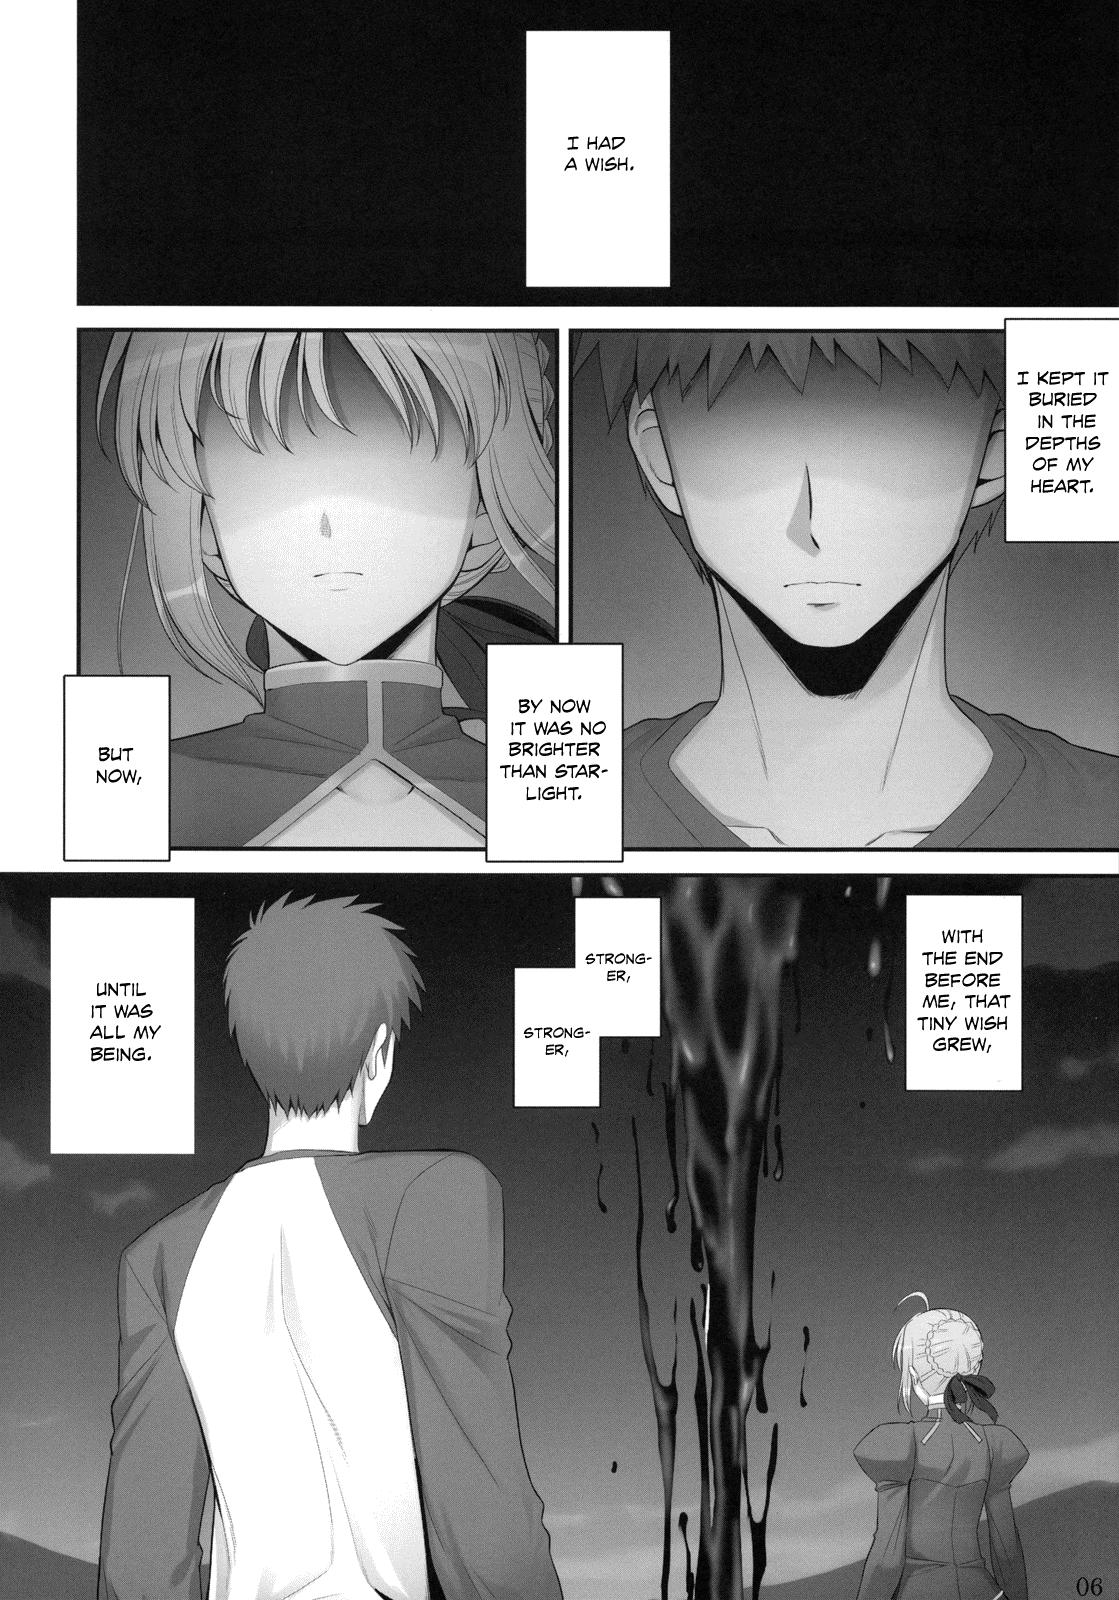 Small Tits Porn RE 09 - Fate stay night  - Page 5